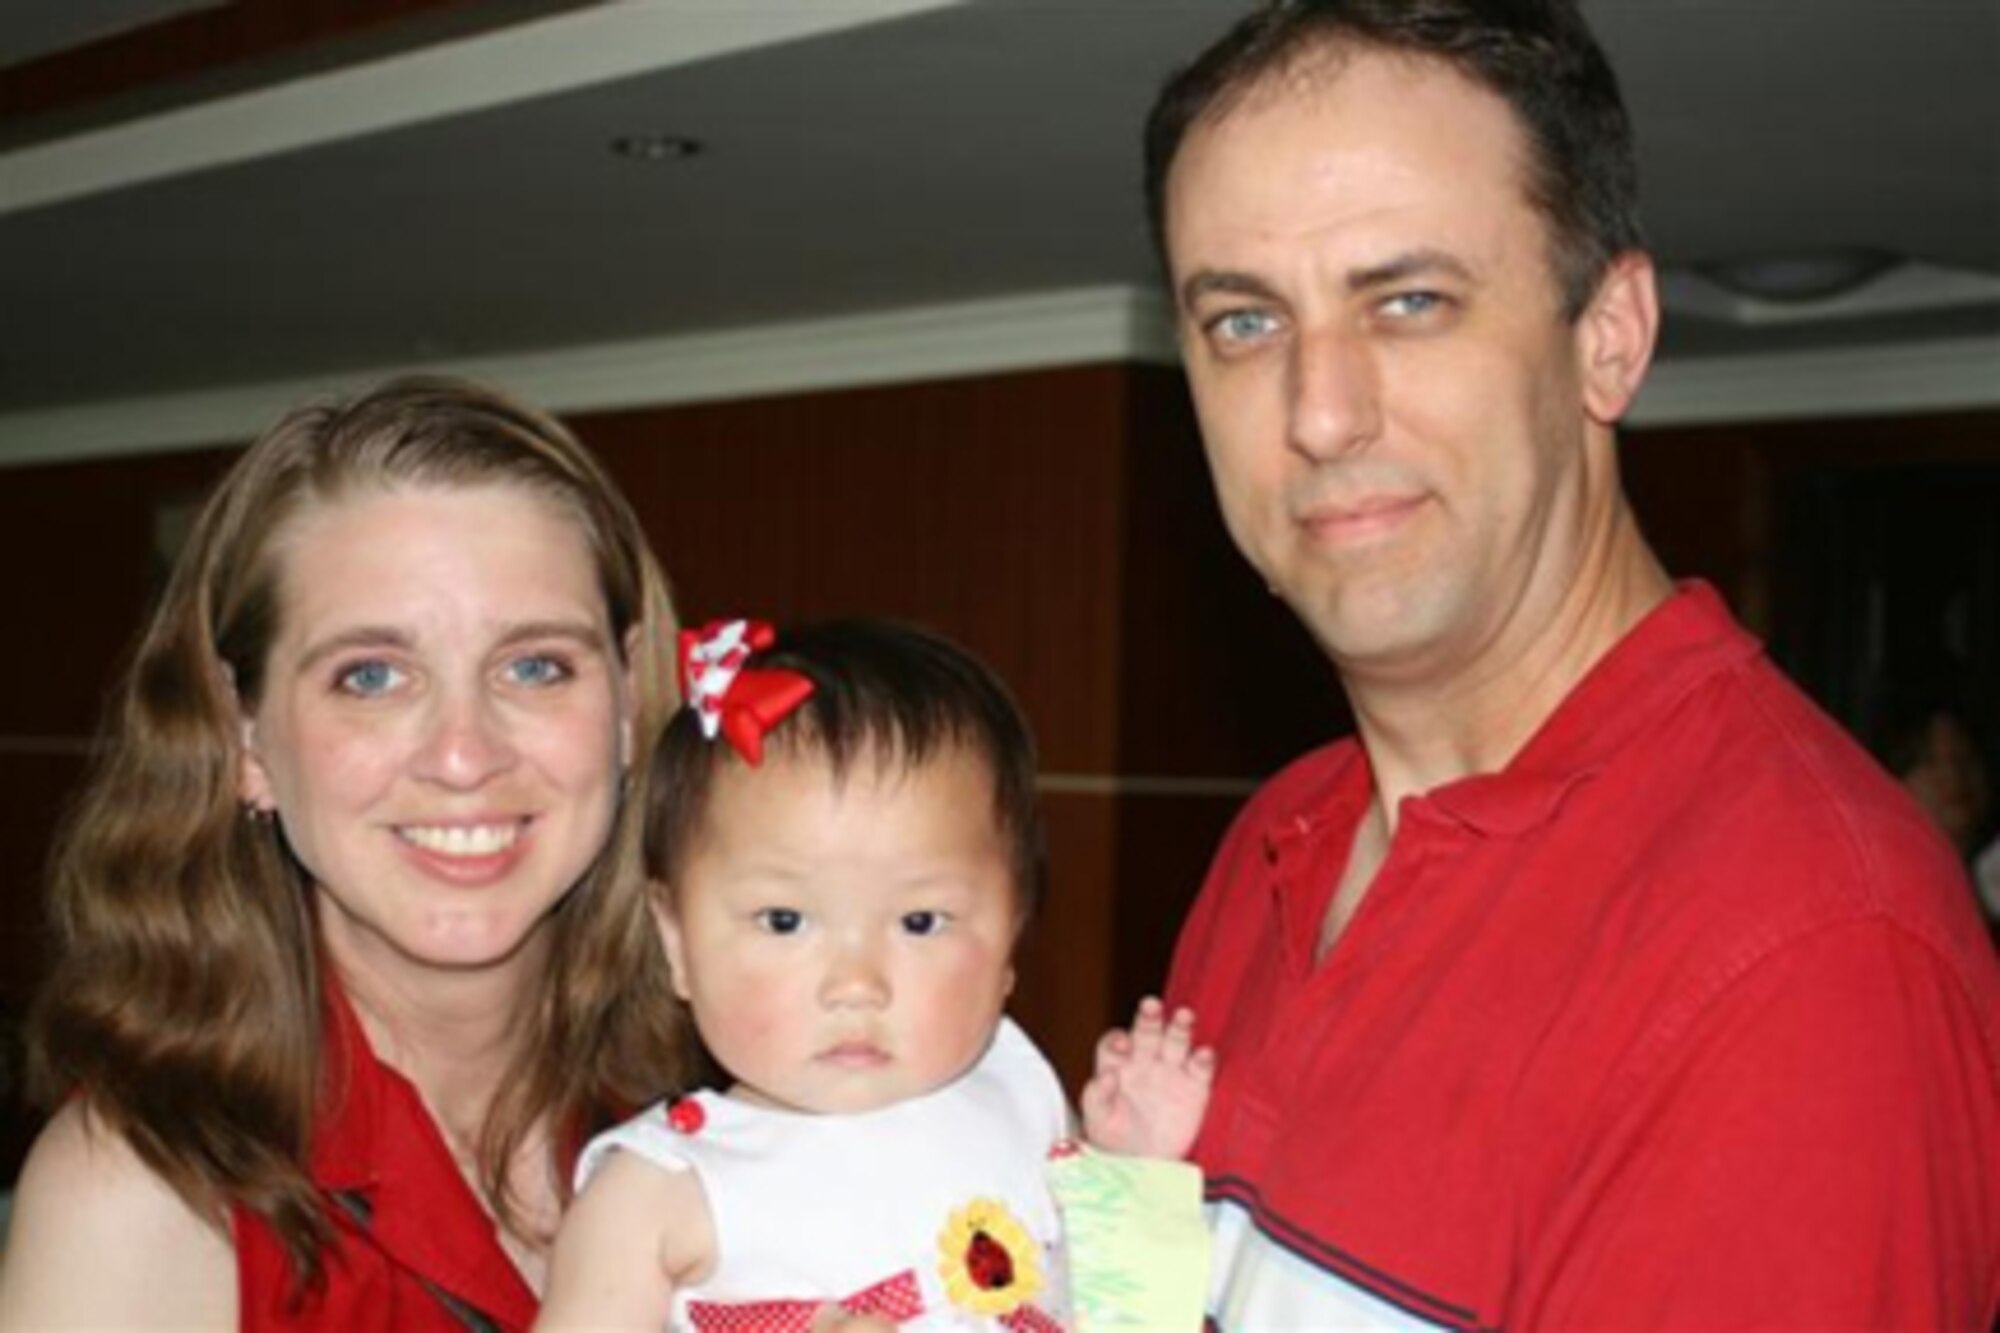 SPANGDAHLEM AIR BASE, Germany – Master Sgt. Allen and Dawn Orahood enjoy their time in China with their newly adopted daughter Sarah AlisonMei Orahood. As part of the adoption process, the Orahoods had to spend two weeks in Sarah’s birth country. Sergeant Orahood is assigned to the 52nd Maintenance Group. Courtesy photo